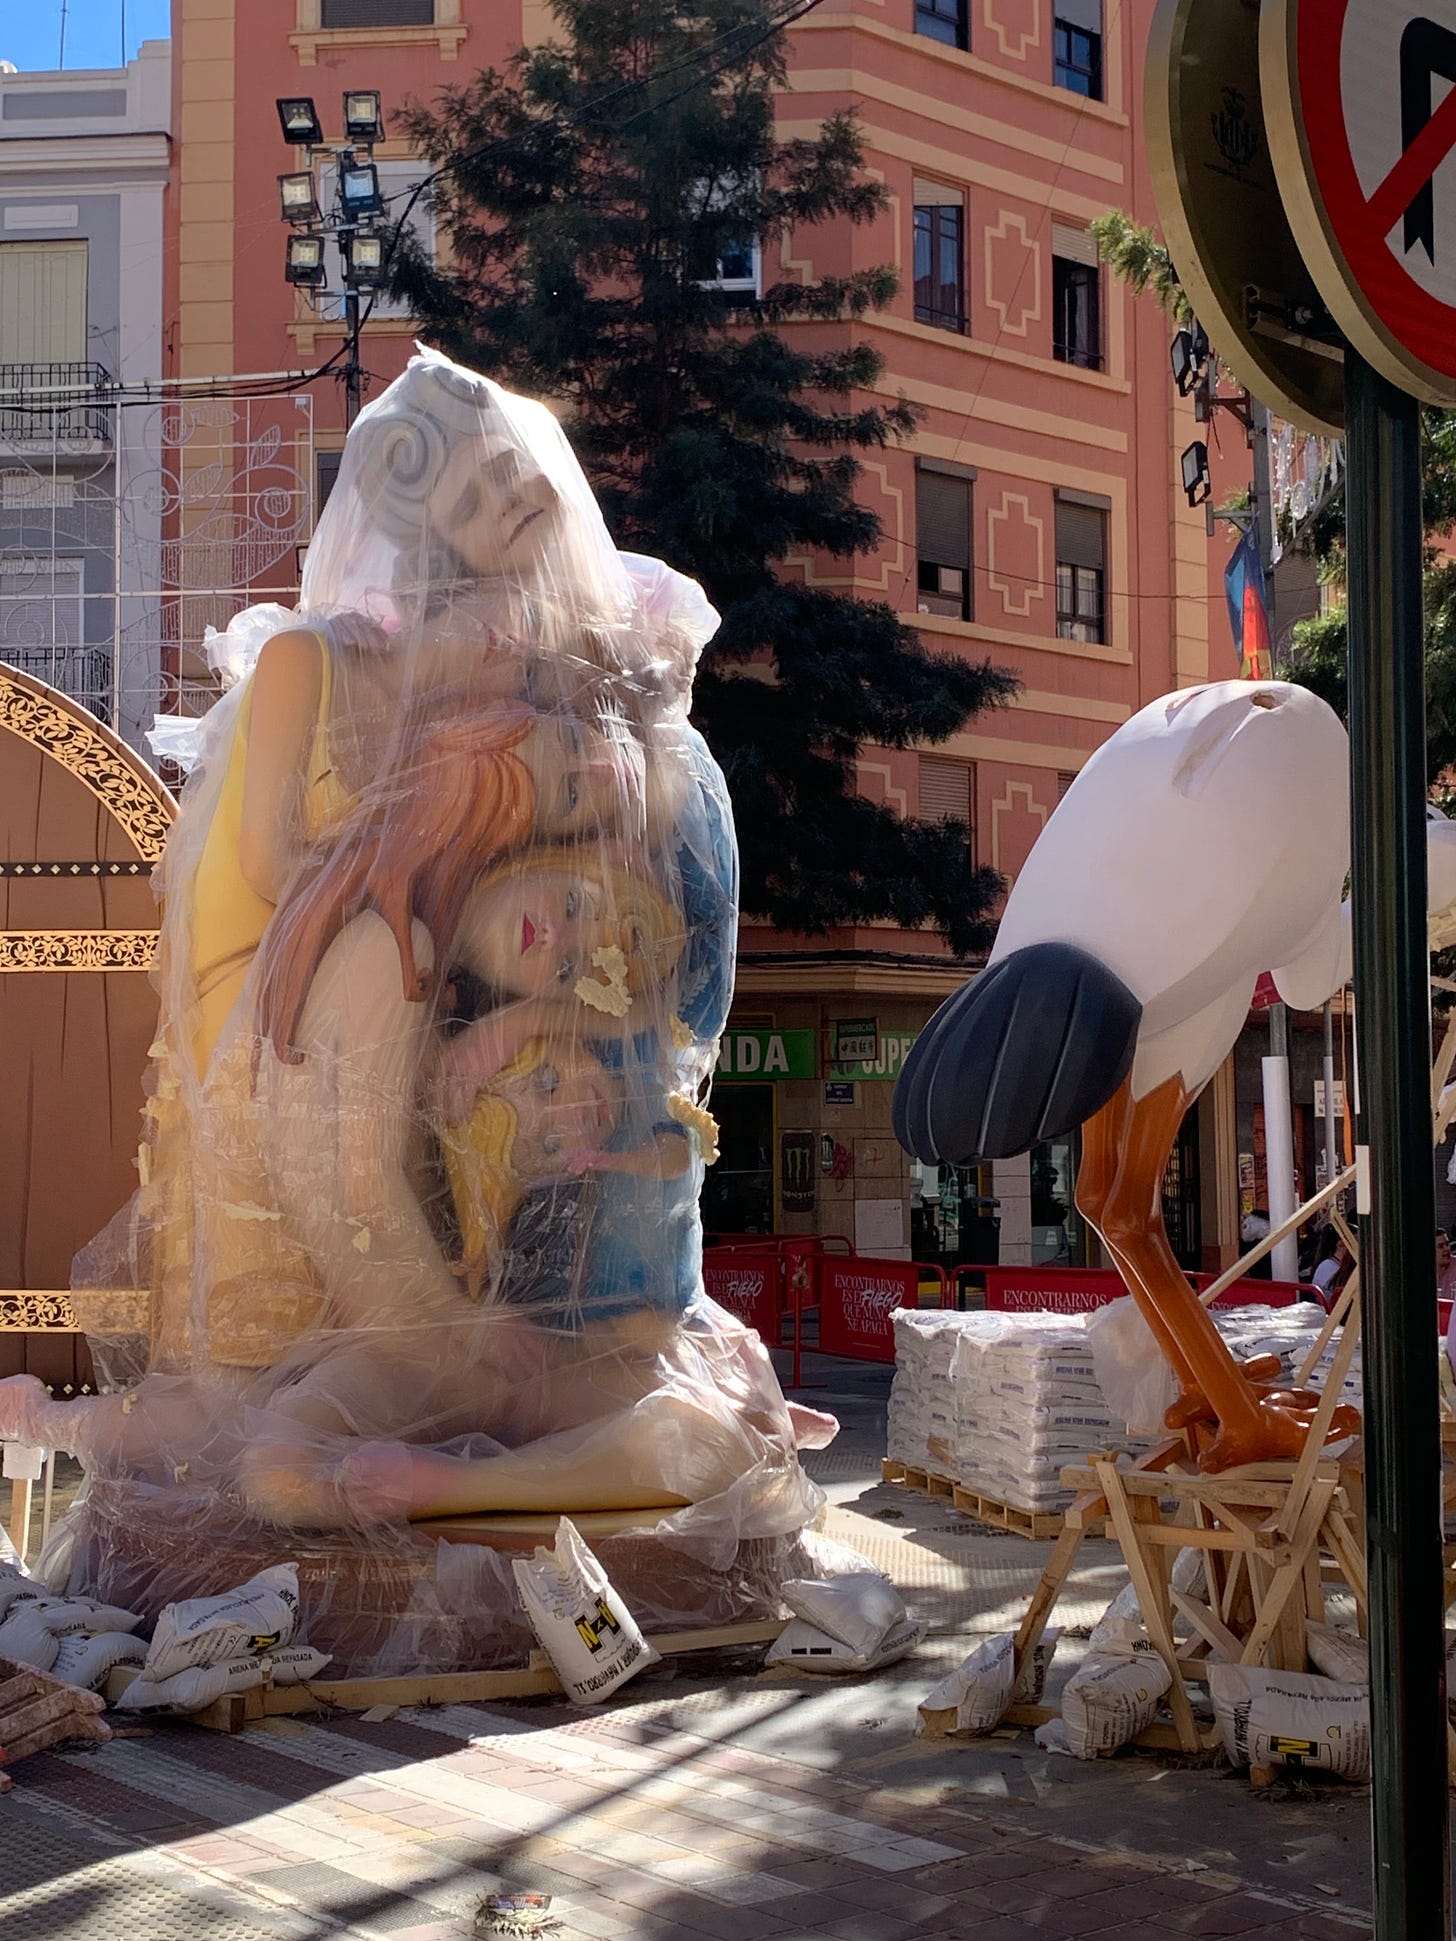 Fallas ninot still wrapped in protective plastic